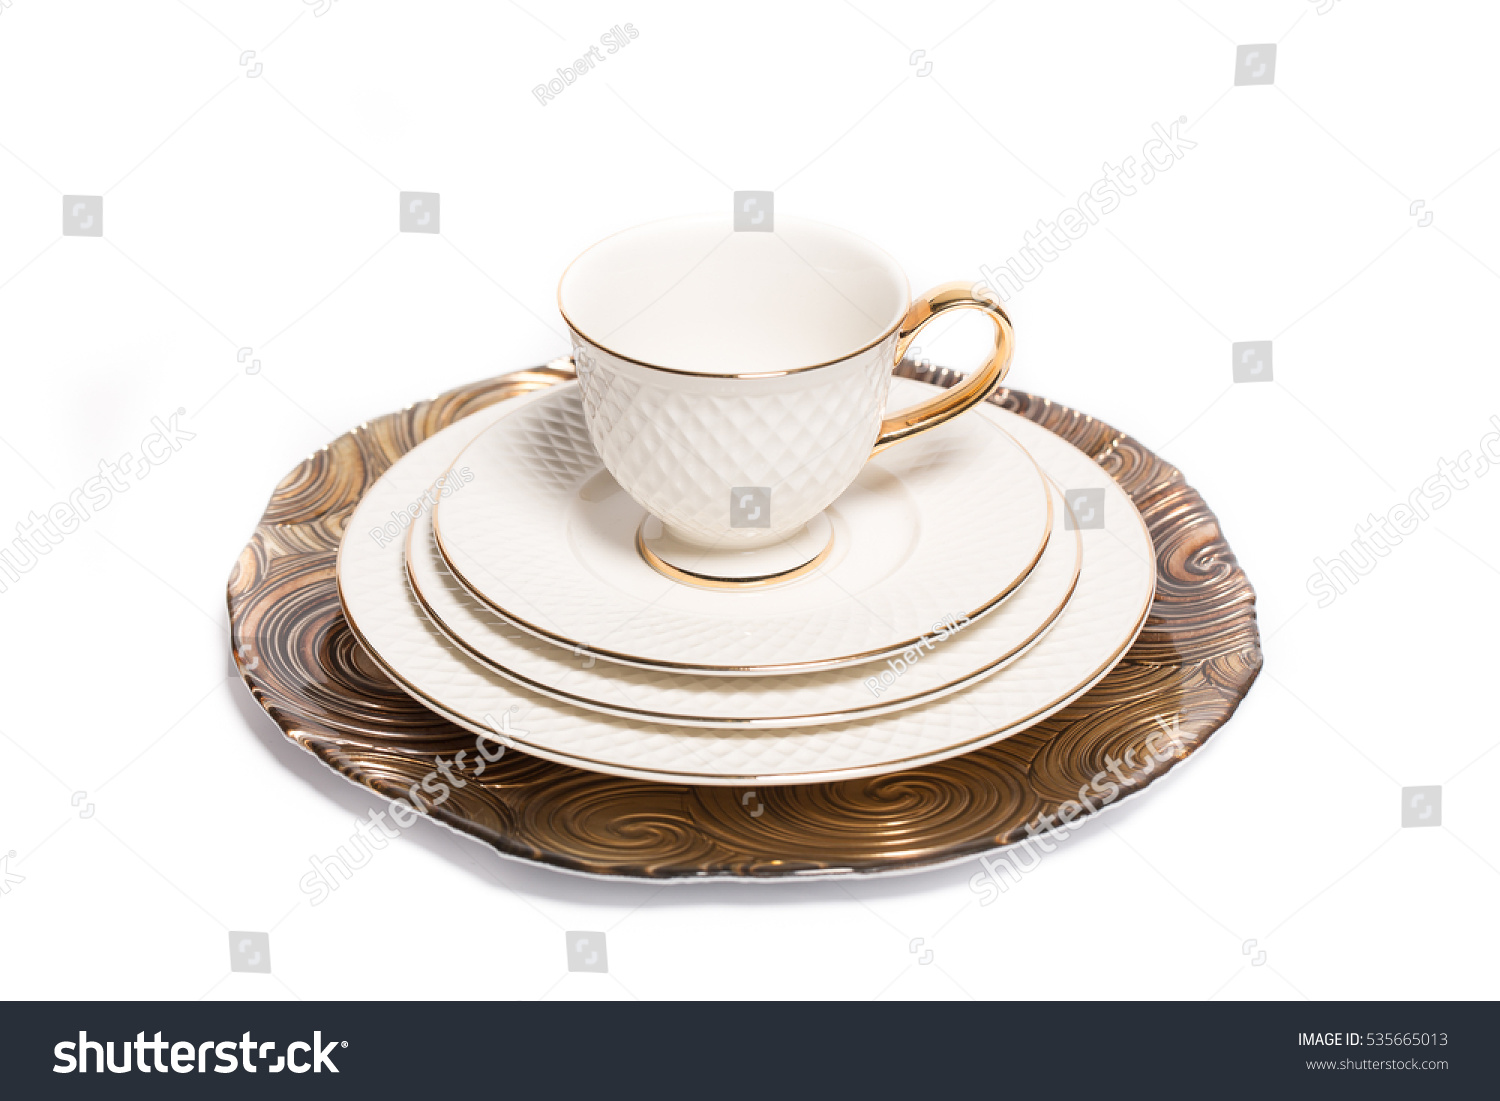 Vintage dishes and a cup isolated on white background #535665013